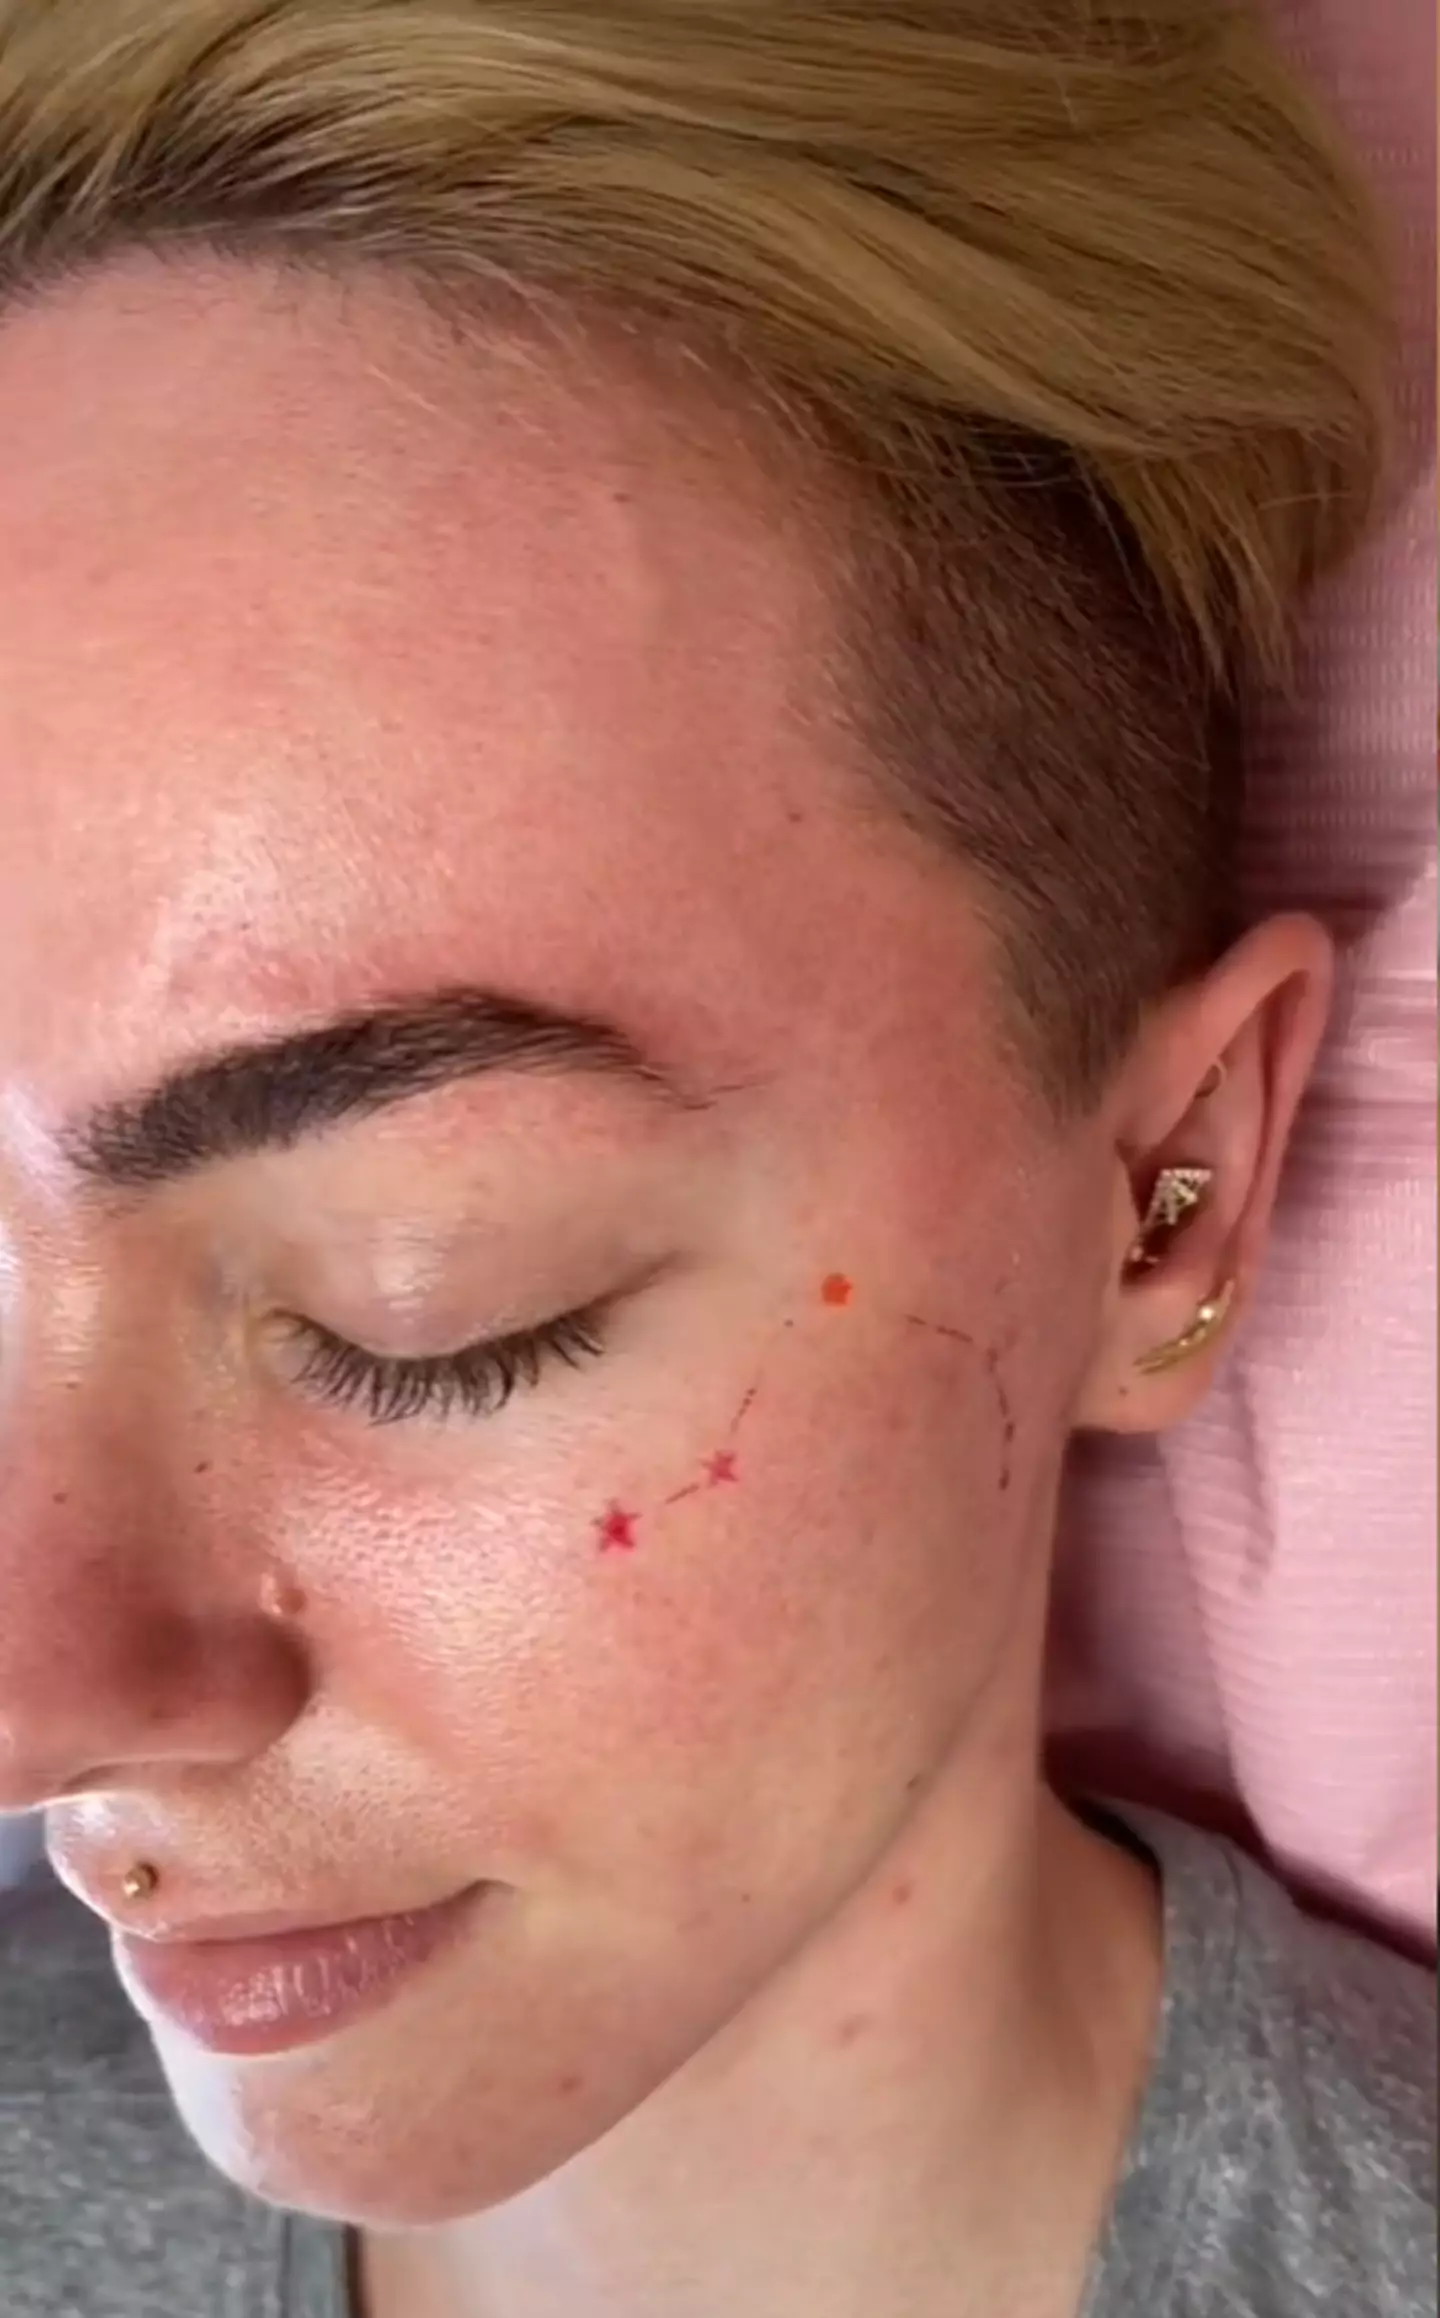 Zodiac Constellation Freckles are also known as "AstroFrecks" - obsessed! (